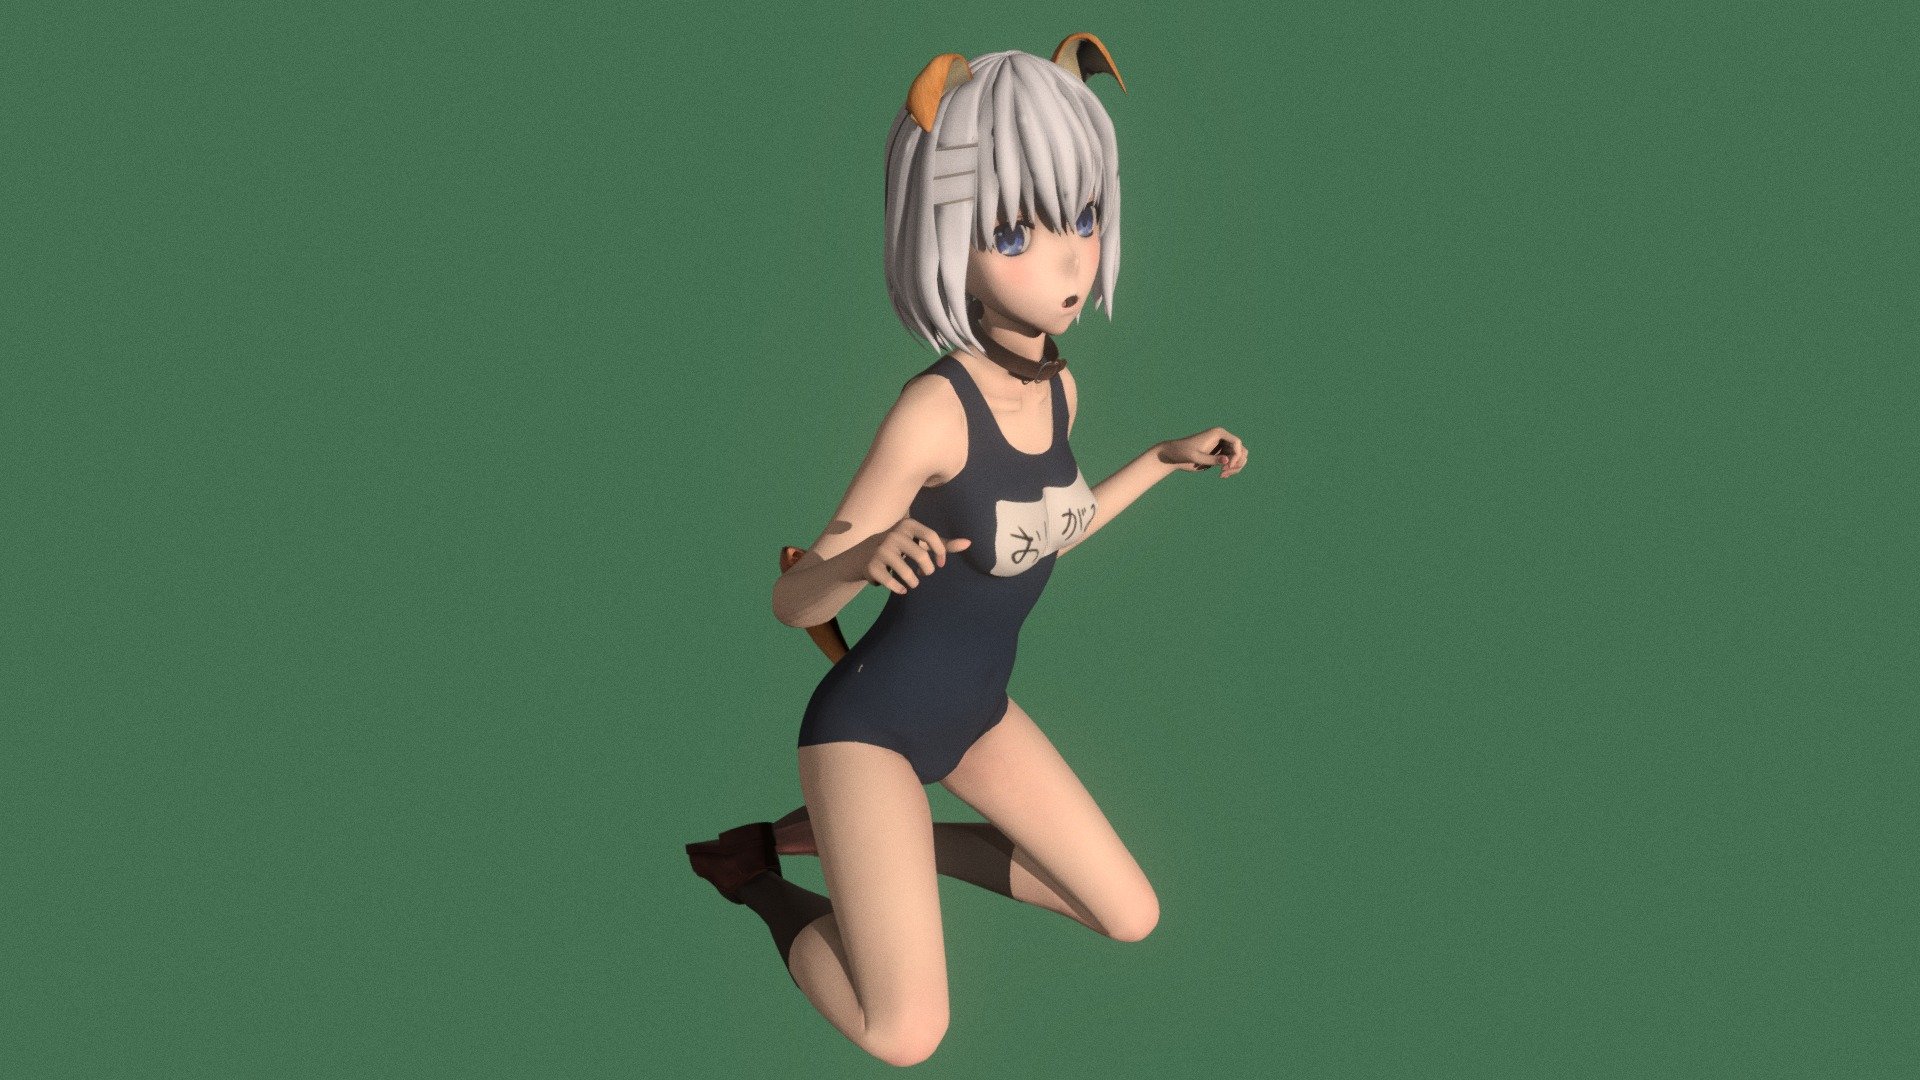 Posed model of anime girl Origami Tobiichi (Date A Live).

This product include .FBX (ver. 7200) and .MAX (ver. 2010) files.

Rigged version: https://sketchfab.com/3d-models/t-pose-rigged-model-of-origami-tobiichi-f0e9c9e53526415395fb6460b9cbc643

I support convert this 3D model to various file formats: 3DS; AI; ASE; DAE; DWF; DWG; DXF; FLT; HTR; IGS; M3G; MQO; OBJ; SAT; STL; W3D; WRL; X.

You can buy all of my models in one pack to save cost: https://sketchfab.com/3d-models/all-of-my-anime-girls-c5a56156994e4193b9e8fa21a3b8360b

And I can make commission models.

If you have any questions, please leave a comment or contact me via my email 3d.eden.project@gmail.com 3d model